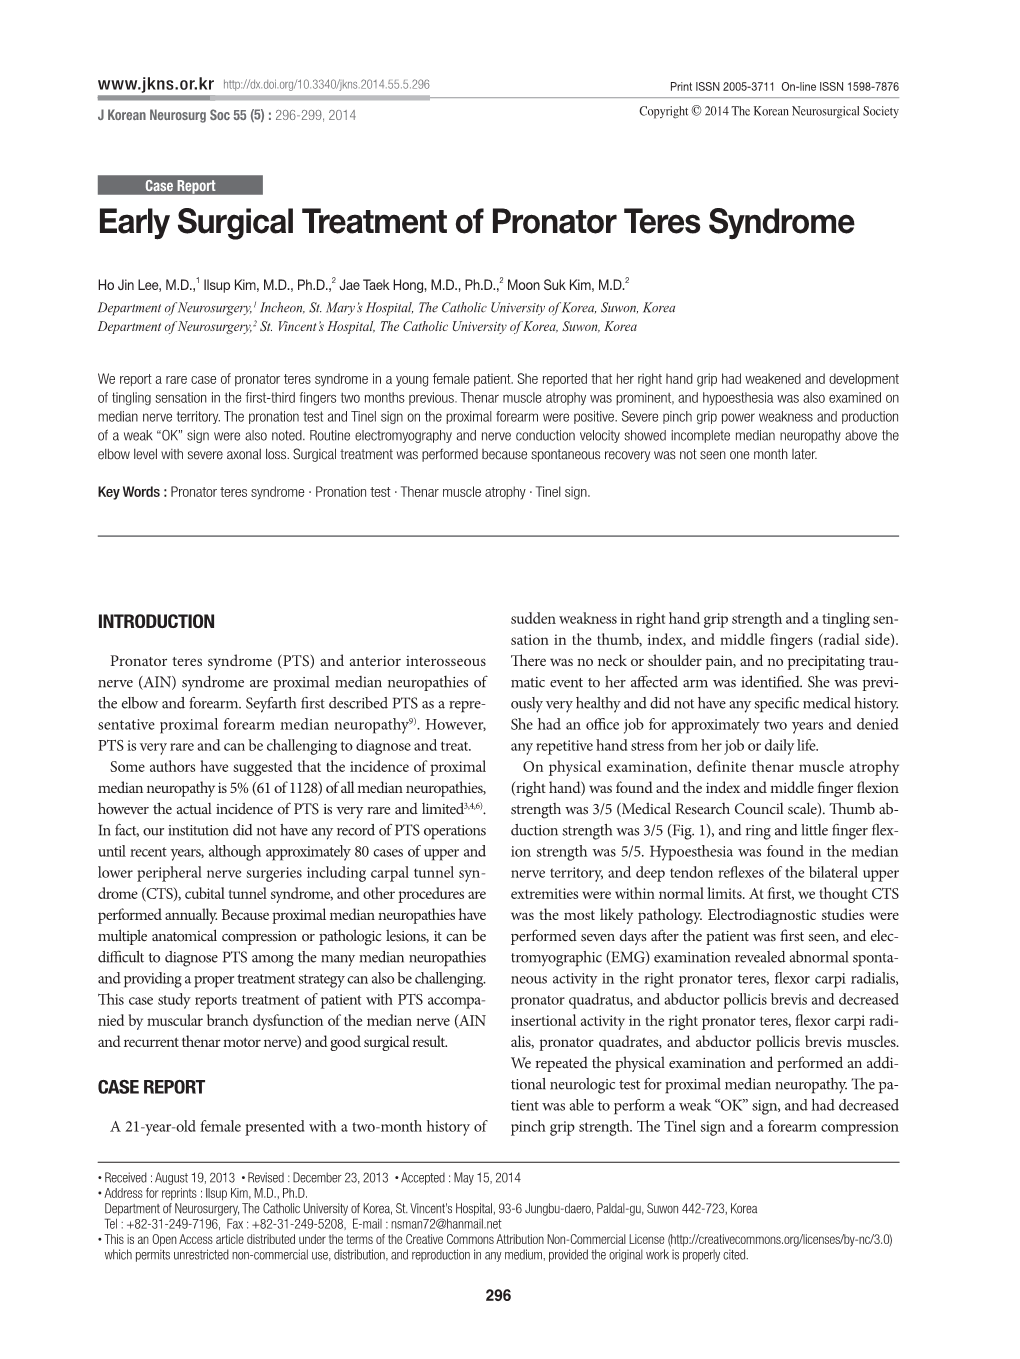 Early Surgical Treatment of Pronator Teres Syndrome